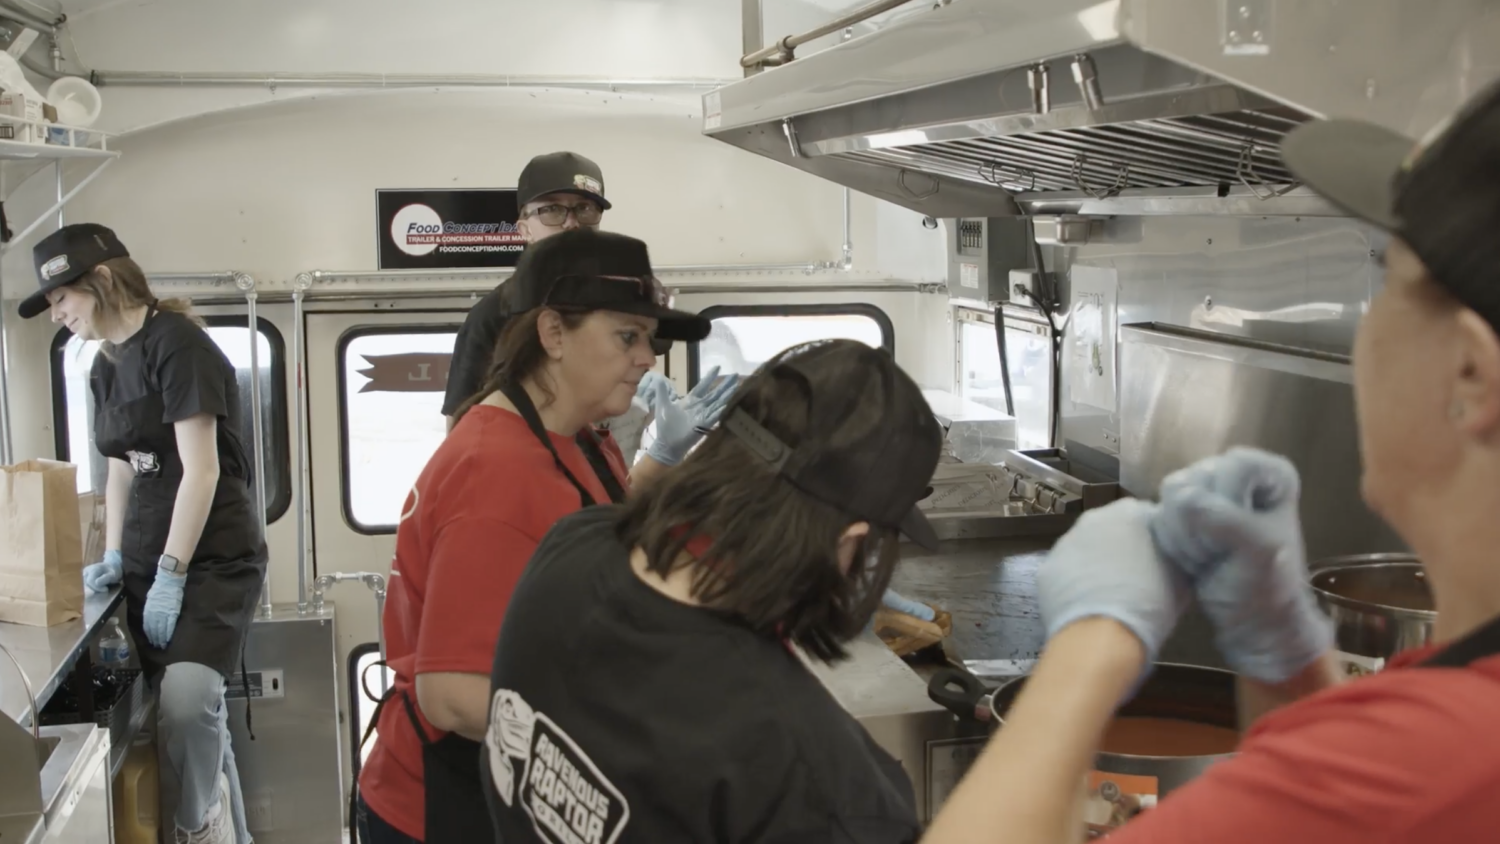 This is a rectangular image of the kitchen area of a food truck. There are five people in the image. Three are wearing black T-shirts & two are wearing reddish color T-shirt. All have a black cap on their heads.